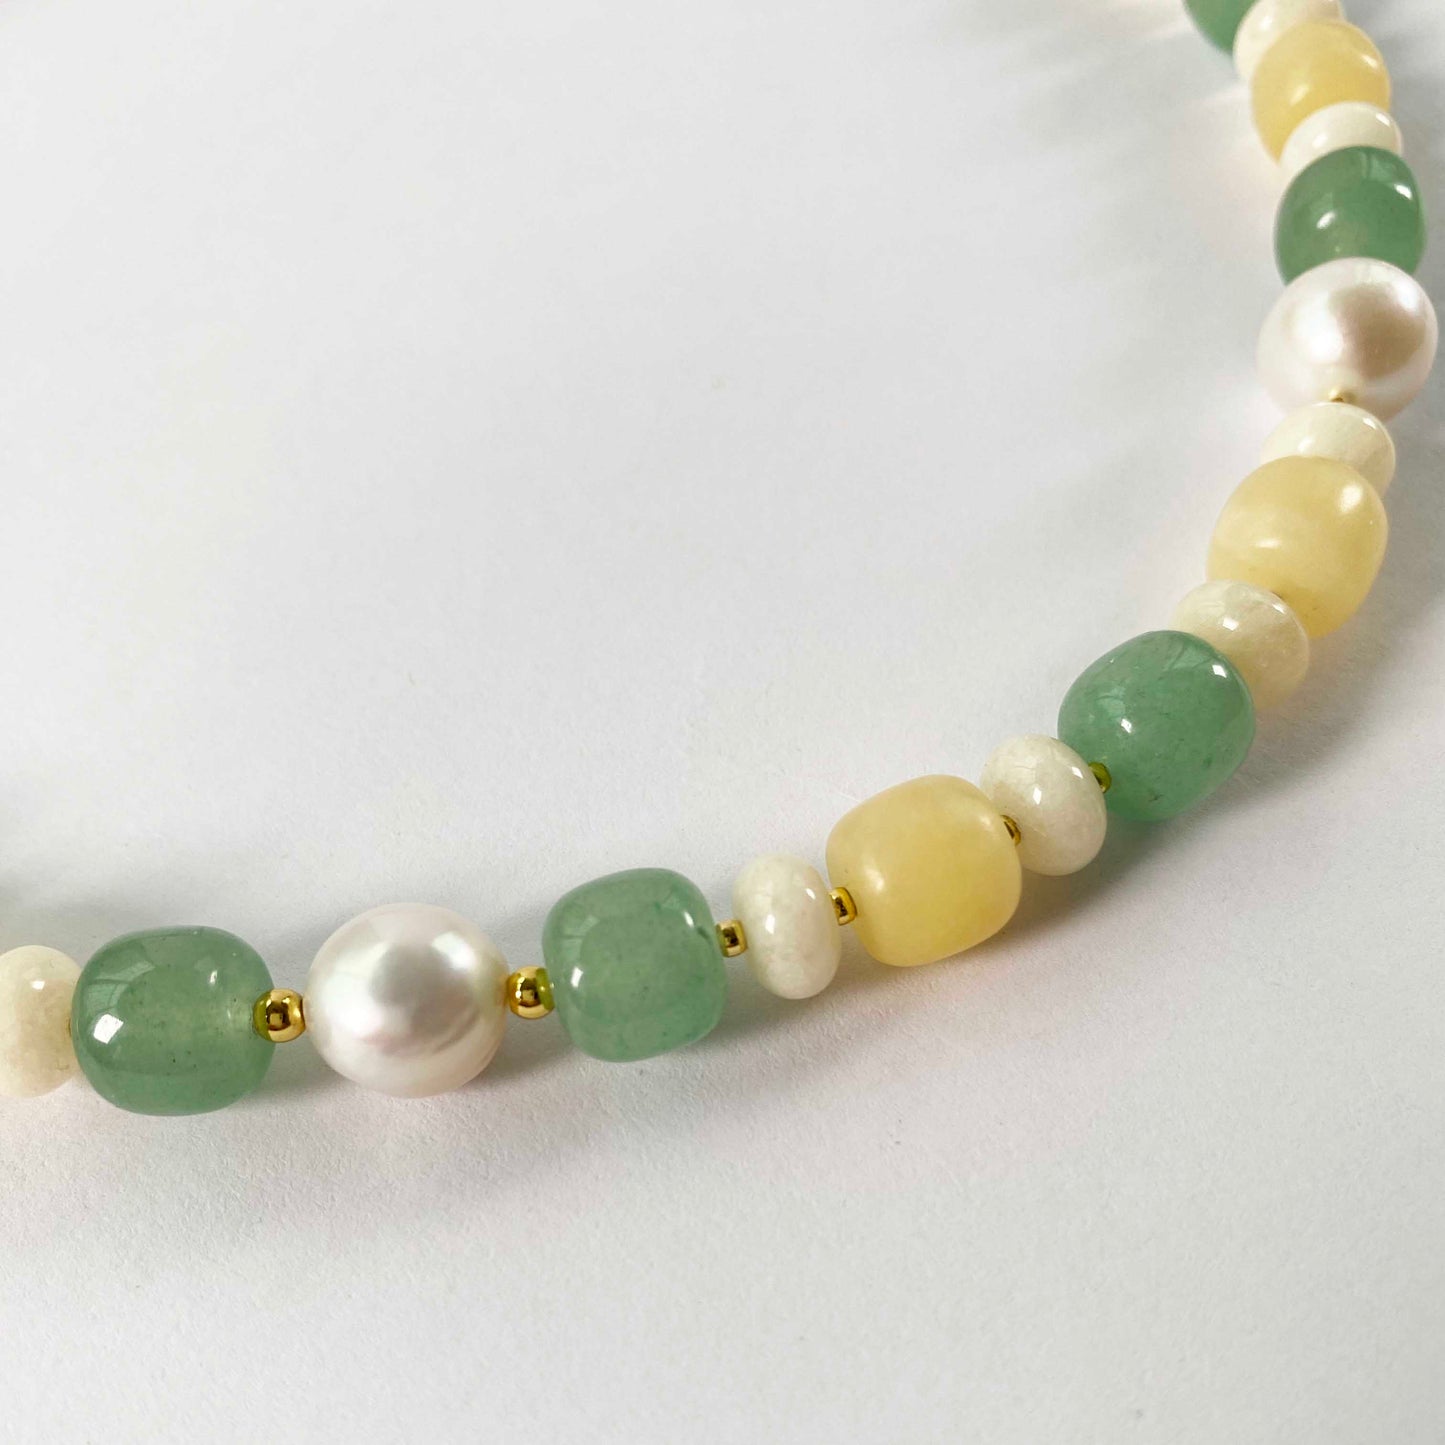 Vintage Chinese Mutton Fat Jade Bead Necklace with .8… - Gem